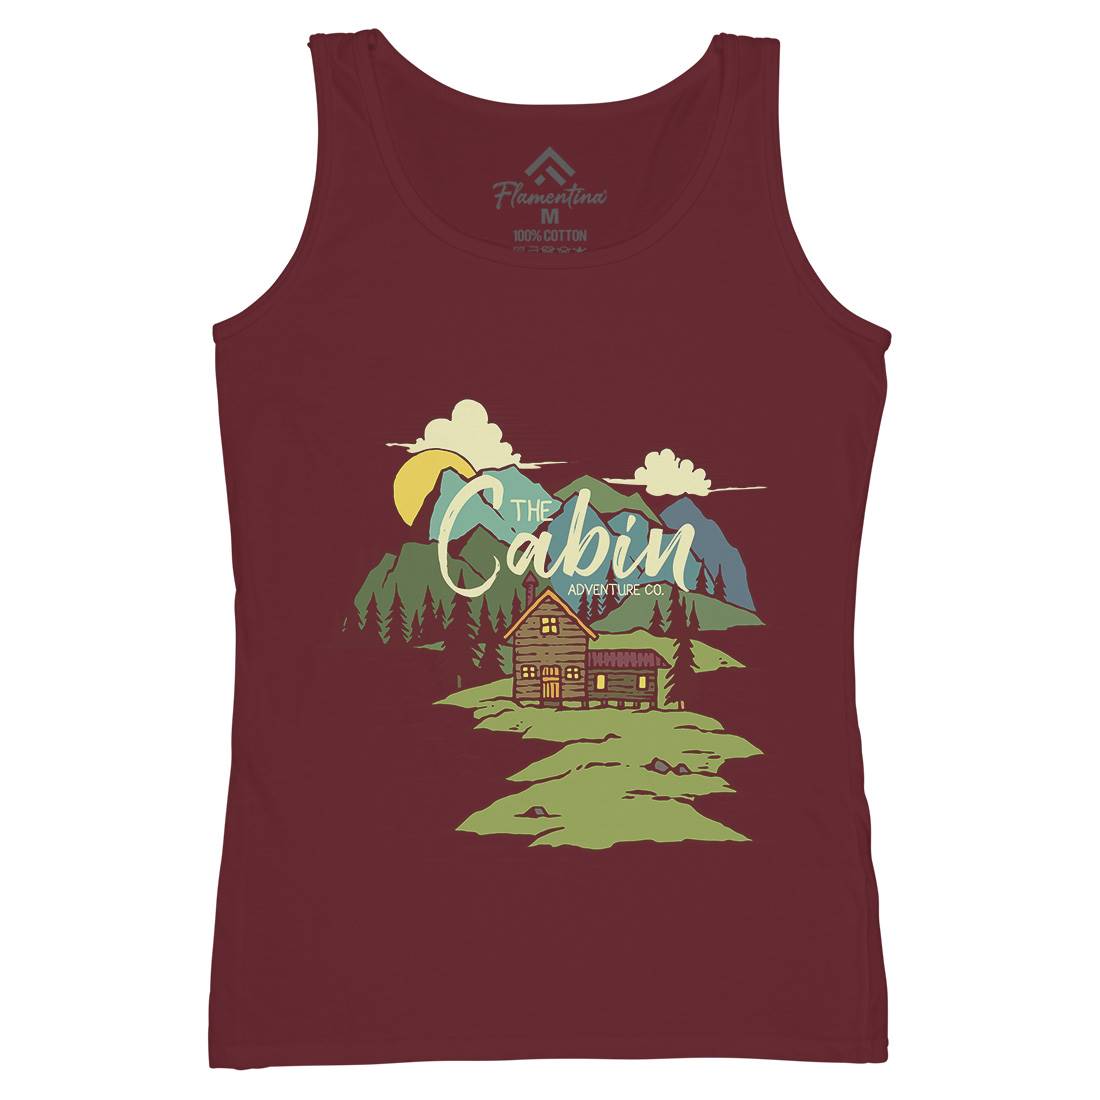 The Cabin On Lake Womens Organic Tank Top Vest Nature C787